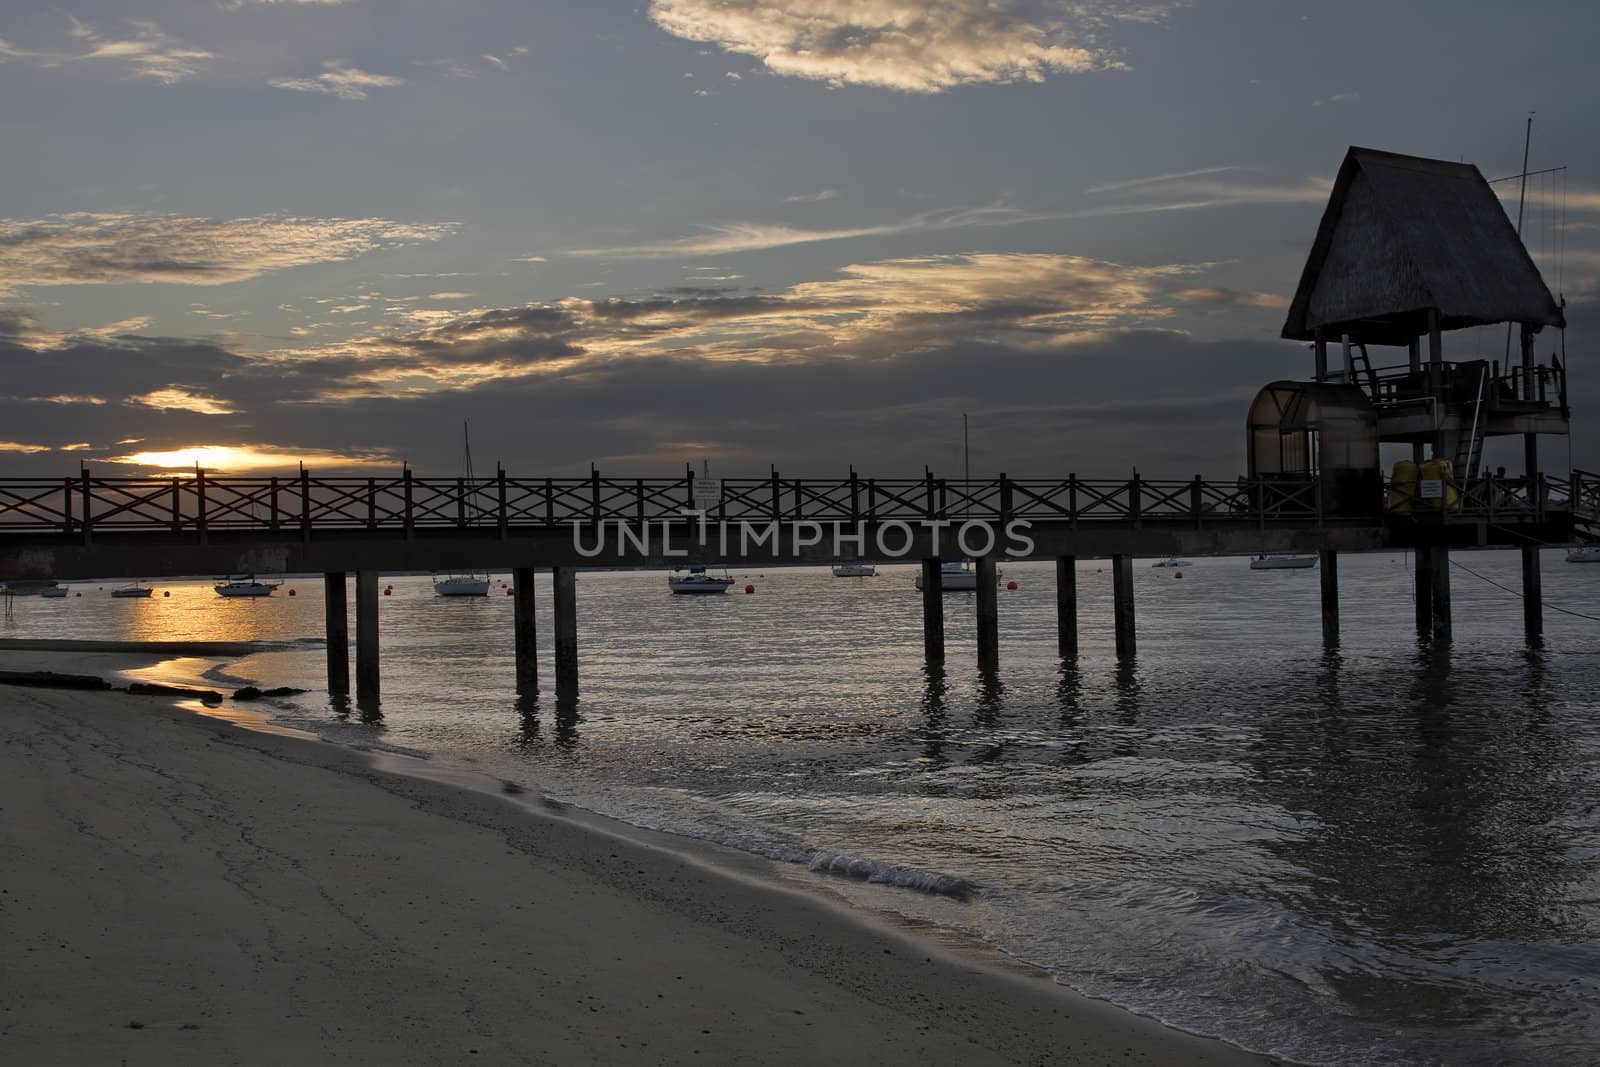 Sunset at the Beach on the Jetty Pier
